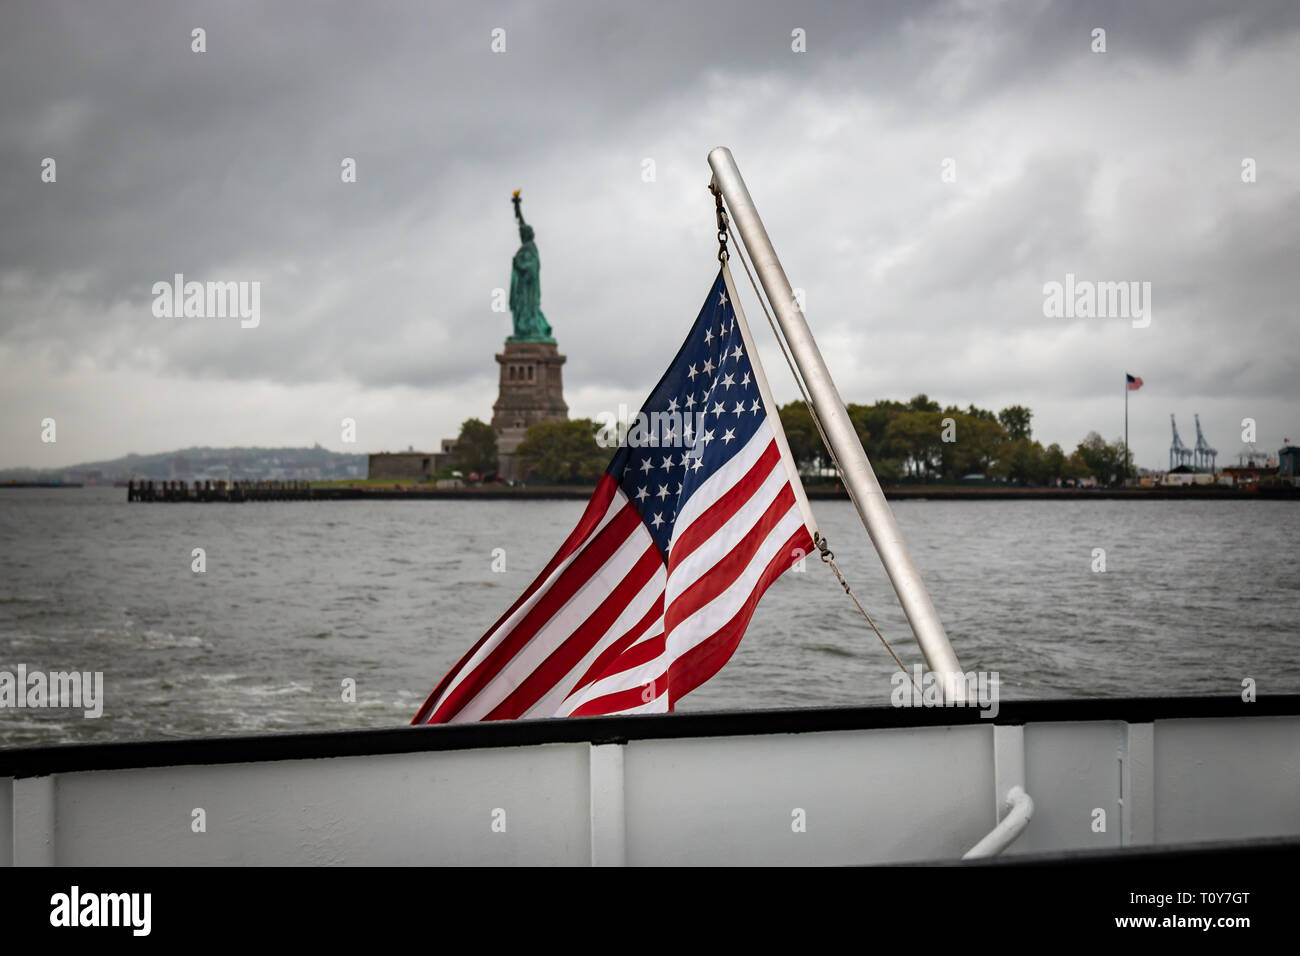 An American flag waves on the back of a boat leaving the Statue of Liberty visible behind on a cloudy, rainy day in September in New York City. Stock Photo